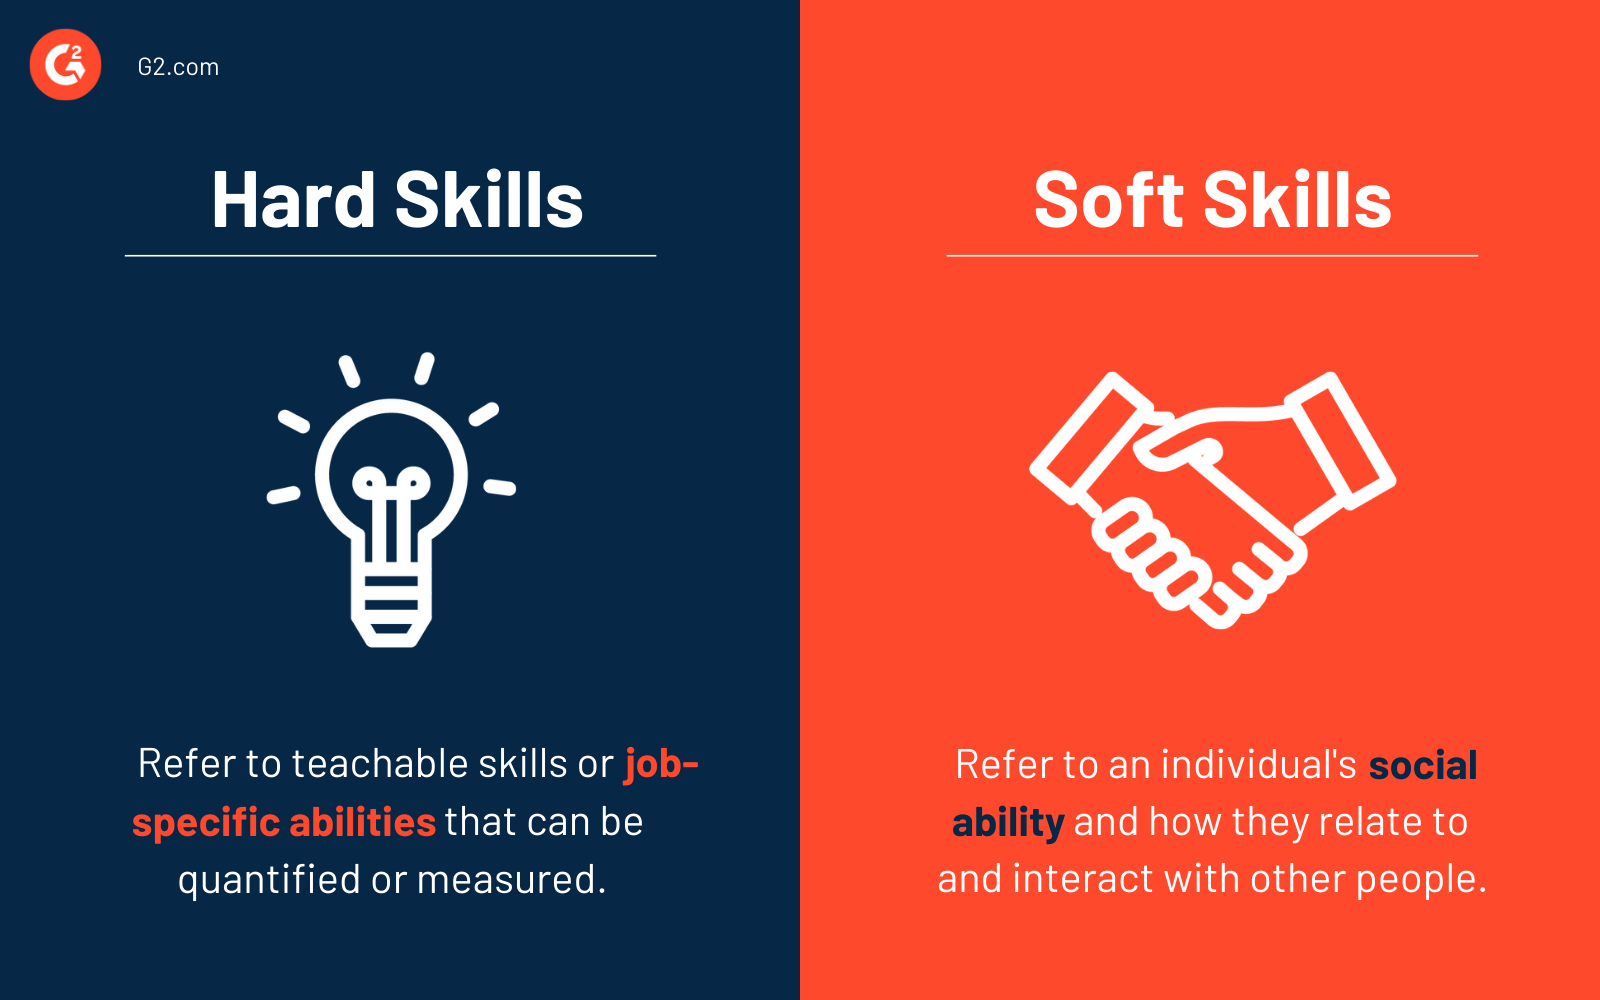 is problem solving a soft skill or hard skill